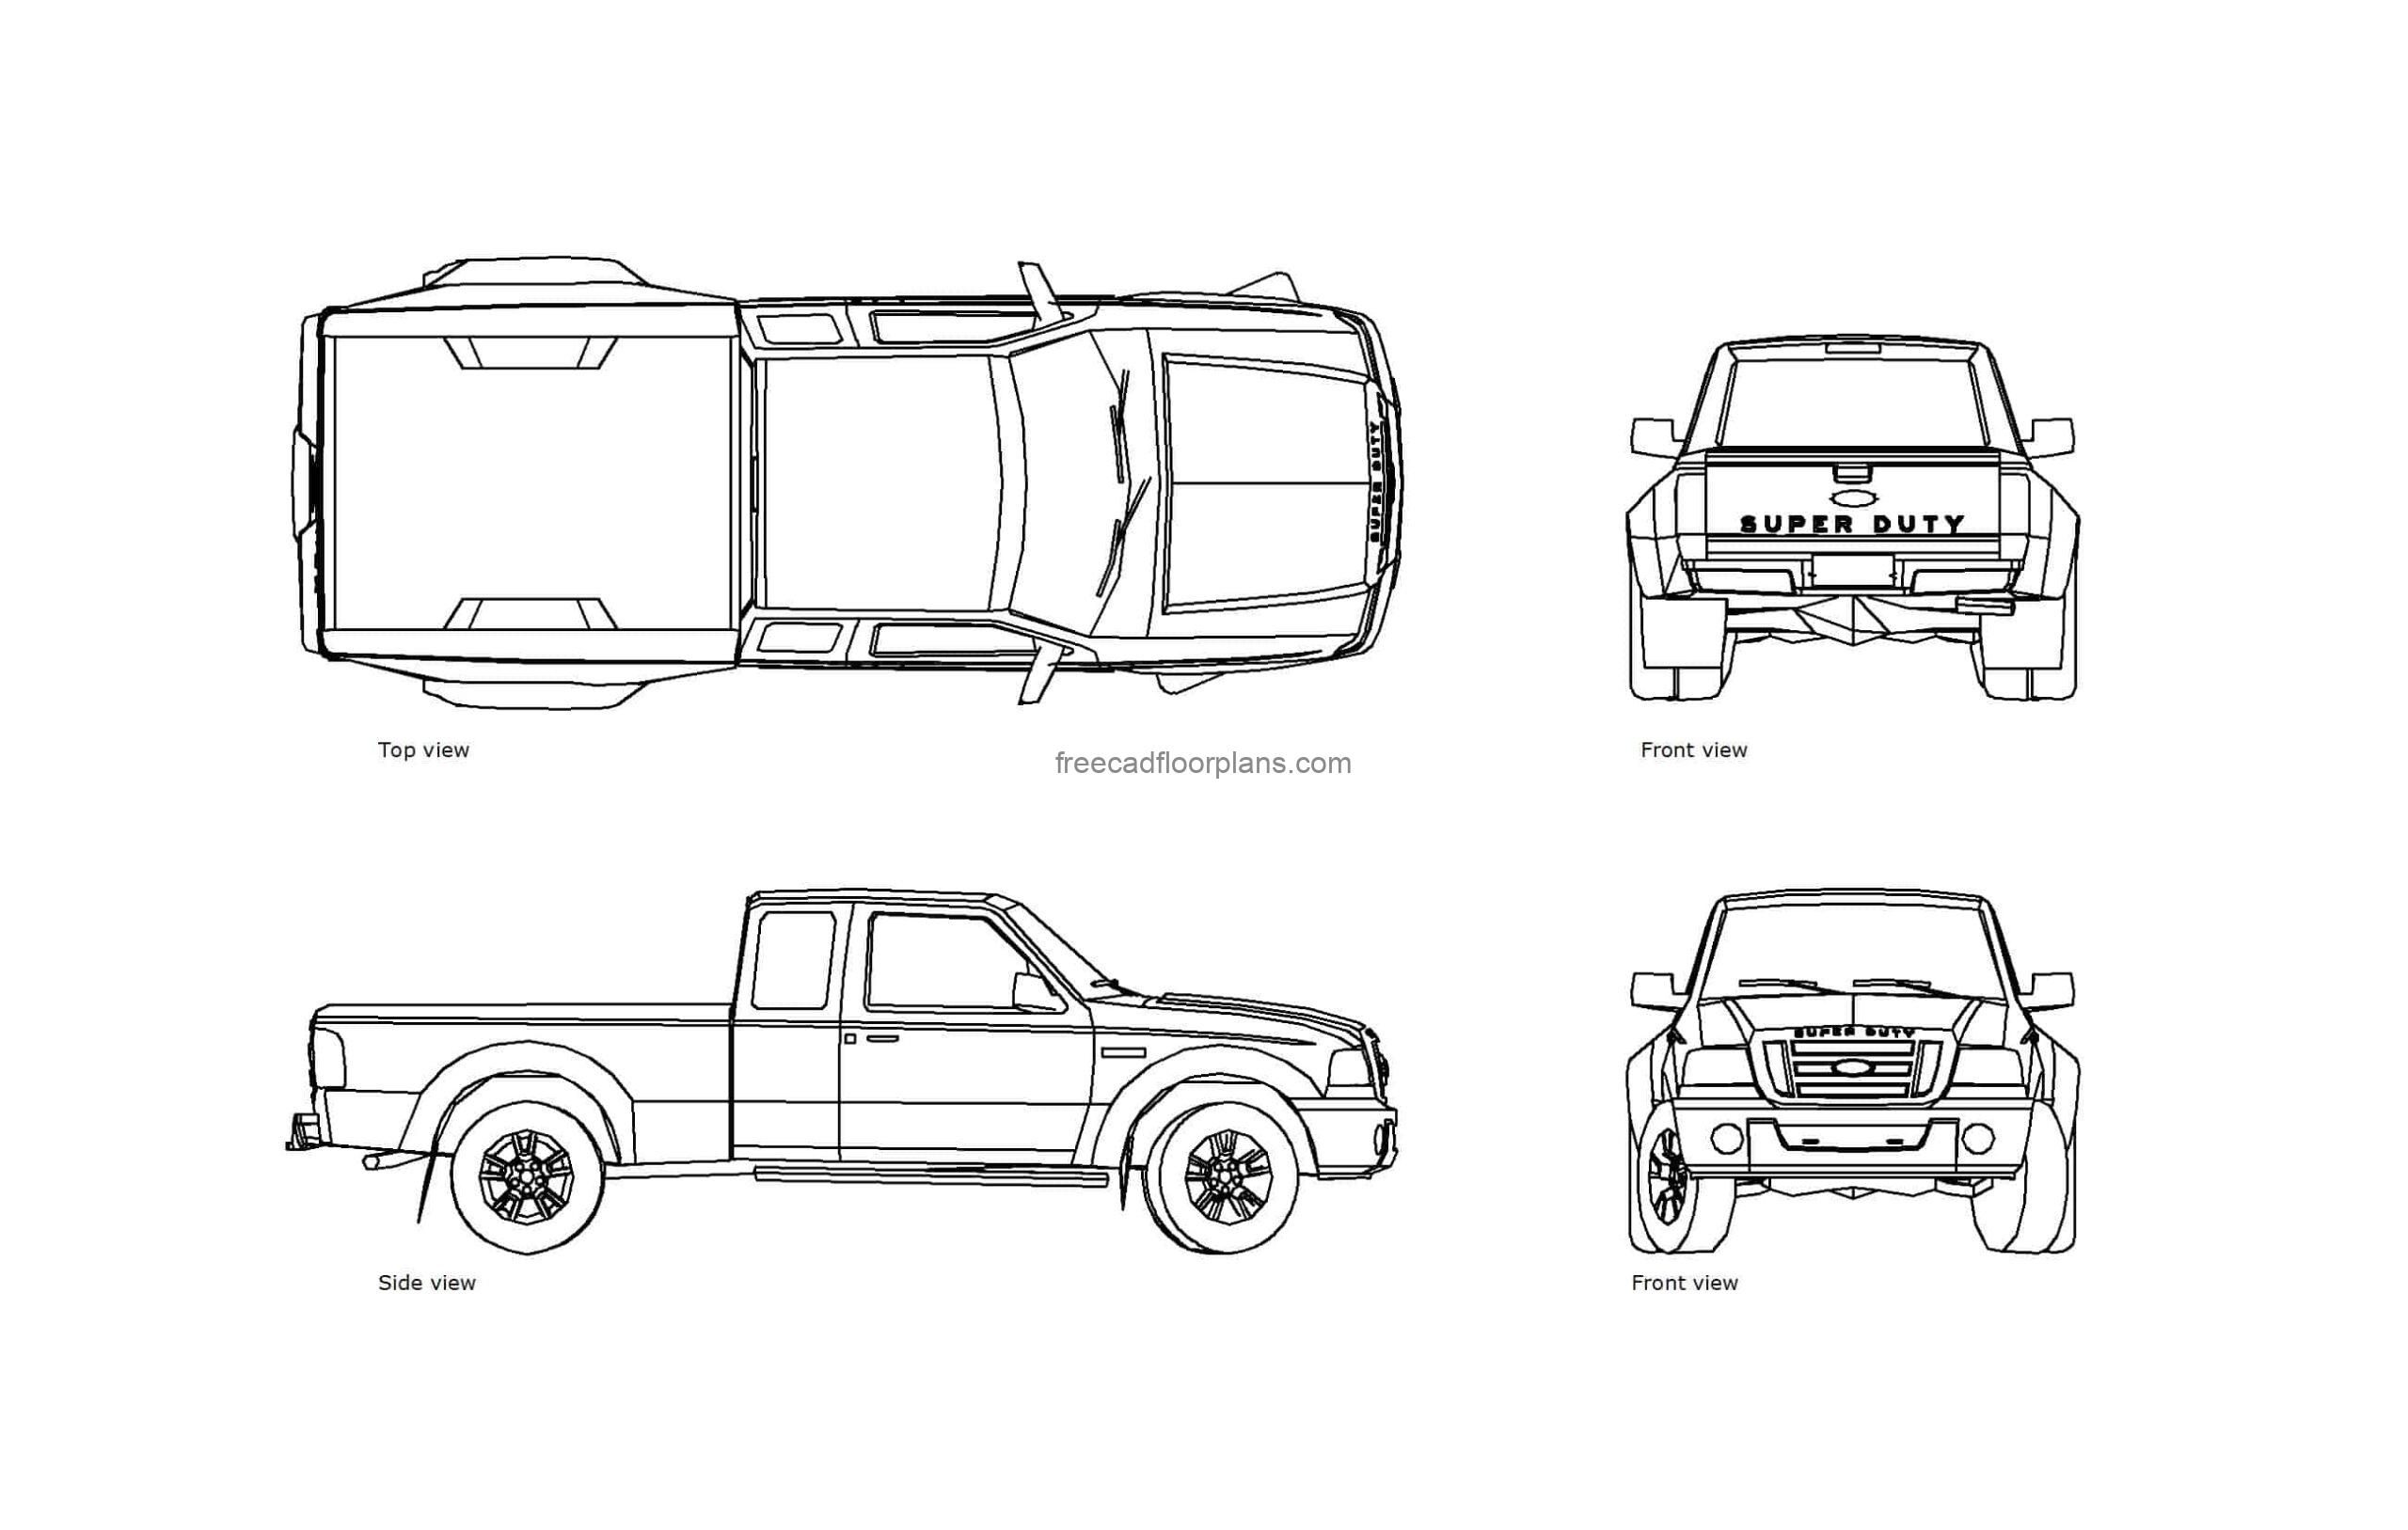 autocad drawing of a ford f450 dually truck, plan and elevation 2d views, dwg file free for download